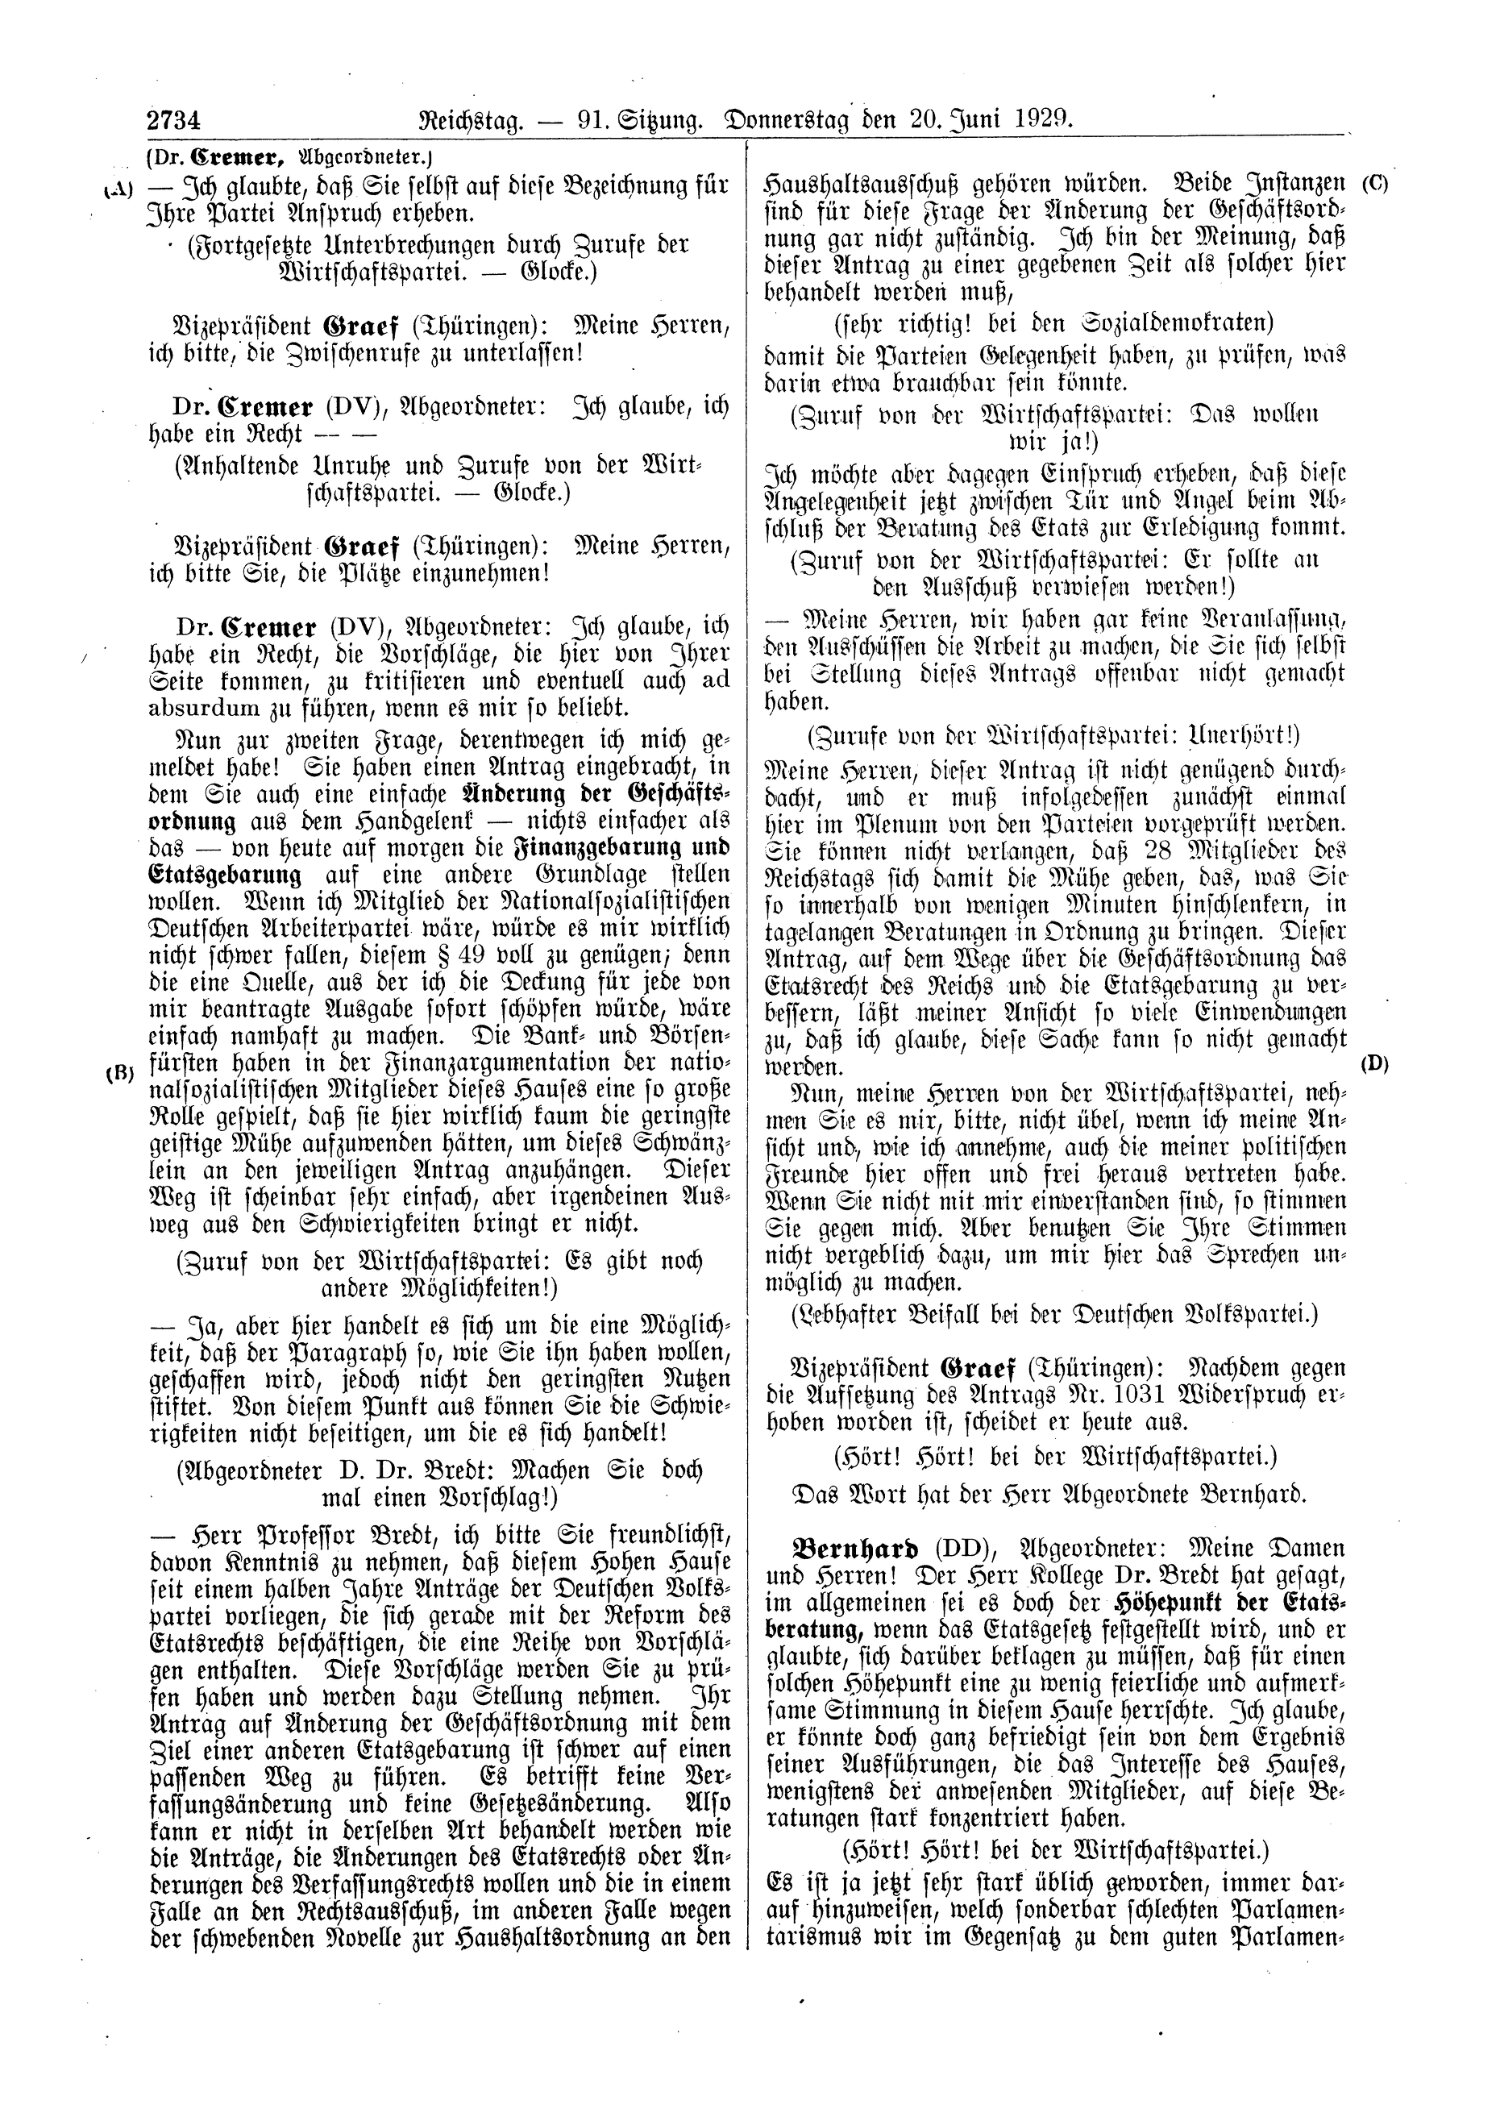 Scan of page 2734